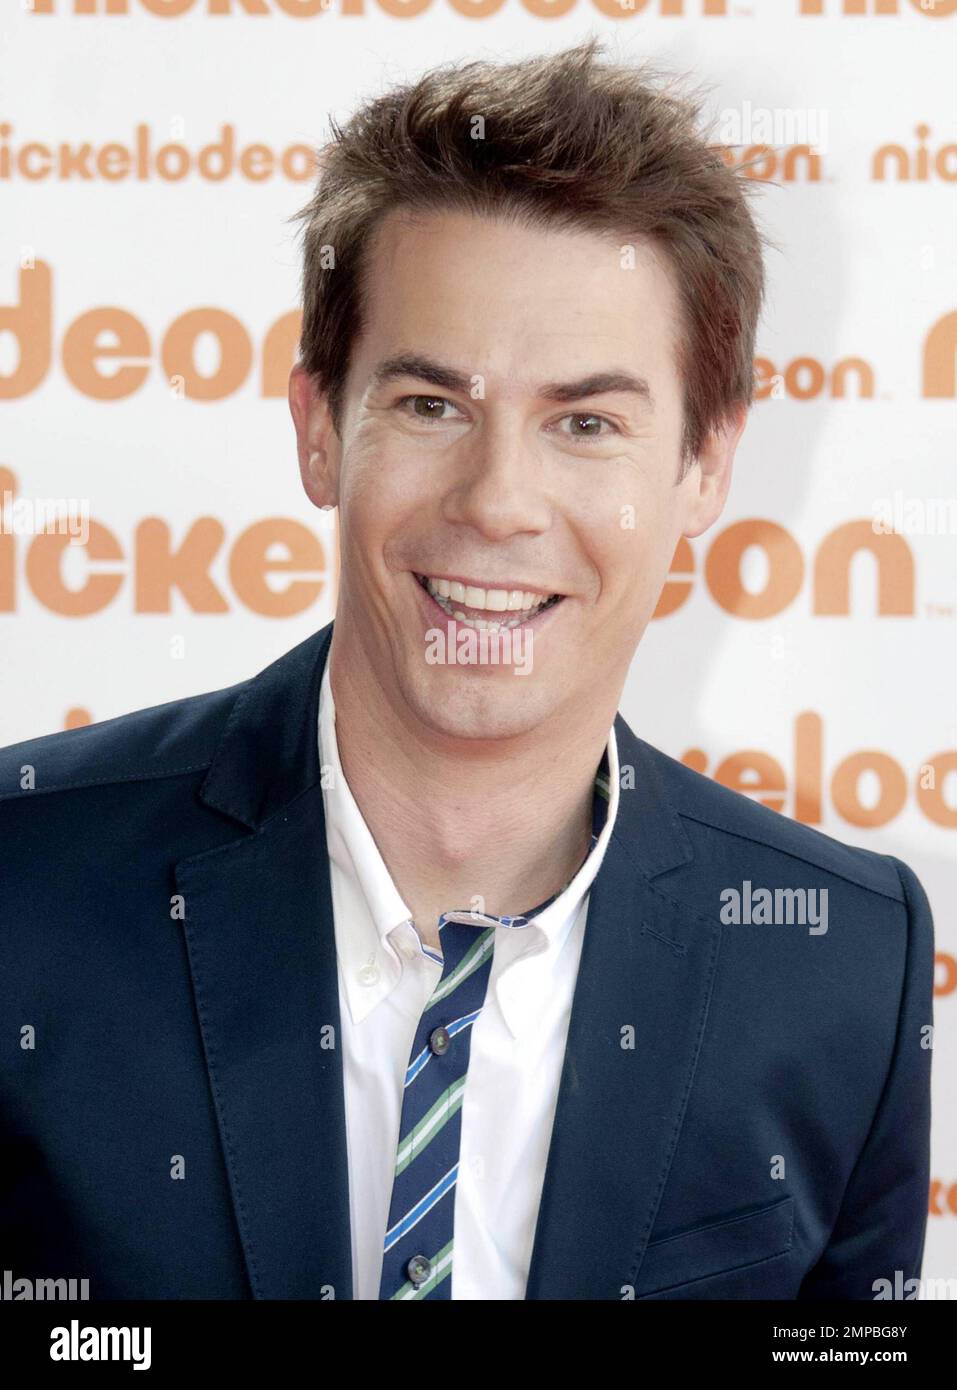 Nickelodeon actor Jerry Trainor poses for photographers as he arrives to co-host the Australian Nickelodeon Kids' Choice Awards 2010 held at the Sydney Entertainment Centre.  Winners of the evening included media personality Rove McManus who picked up the Awesome Aussie Award and Australian pop singer Cody Simpson who won the Aussie Muso Award. Sydney, AUS. 10/08/10. Stock Photo